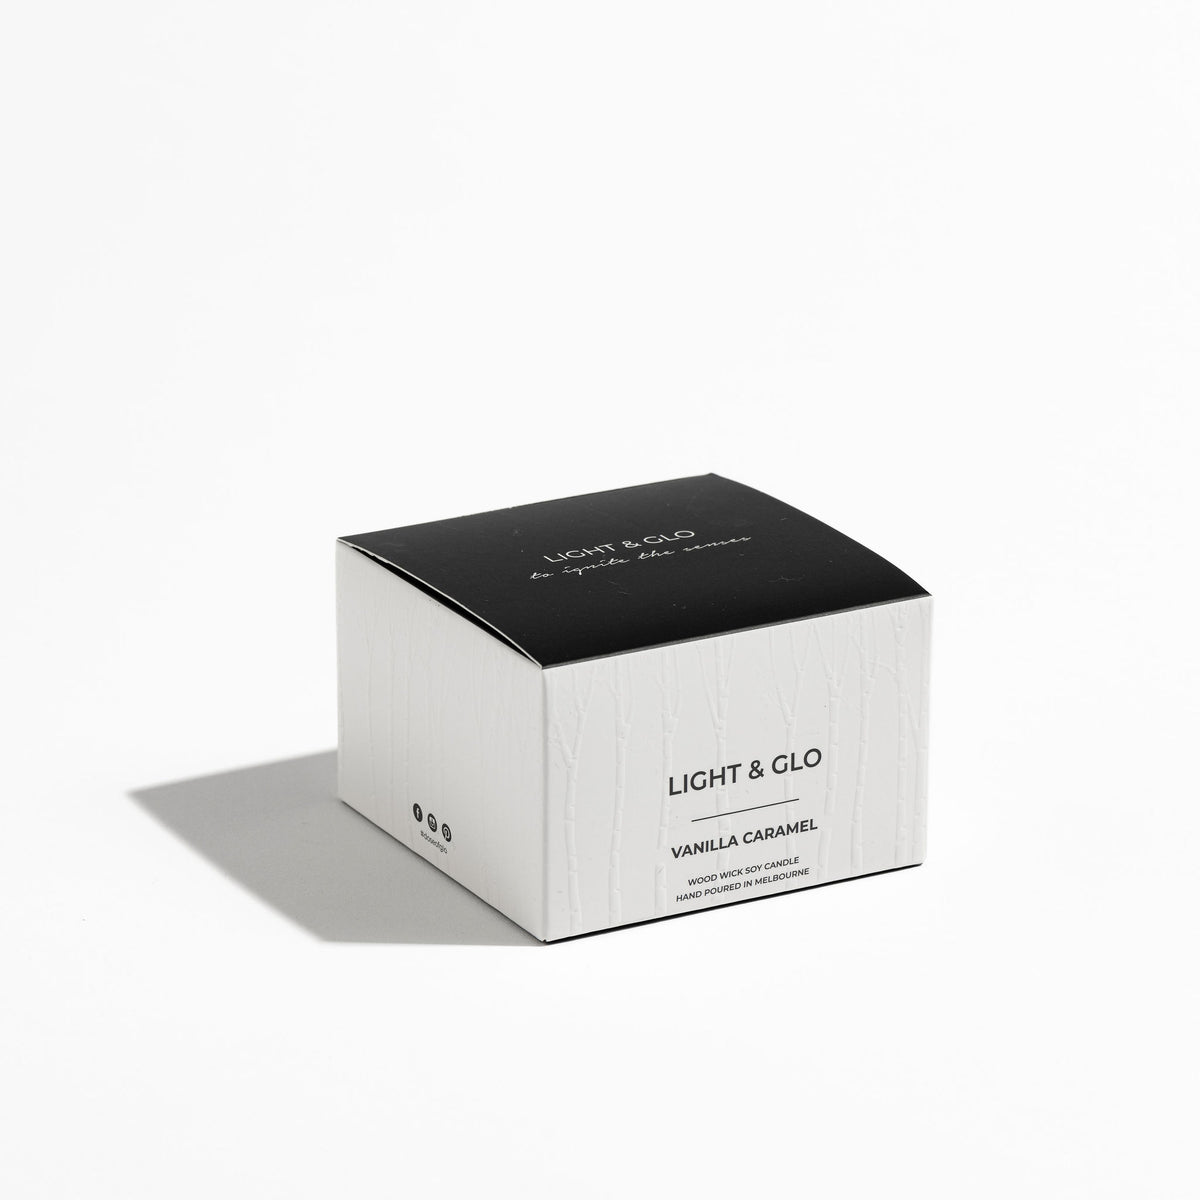 Vanilla Caramel - Monochrome Travel Candle | Luxury Candles &amp; Home Fragrances by Light + Glo